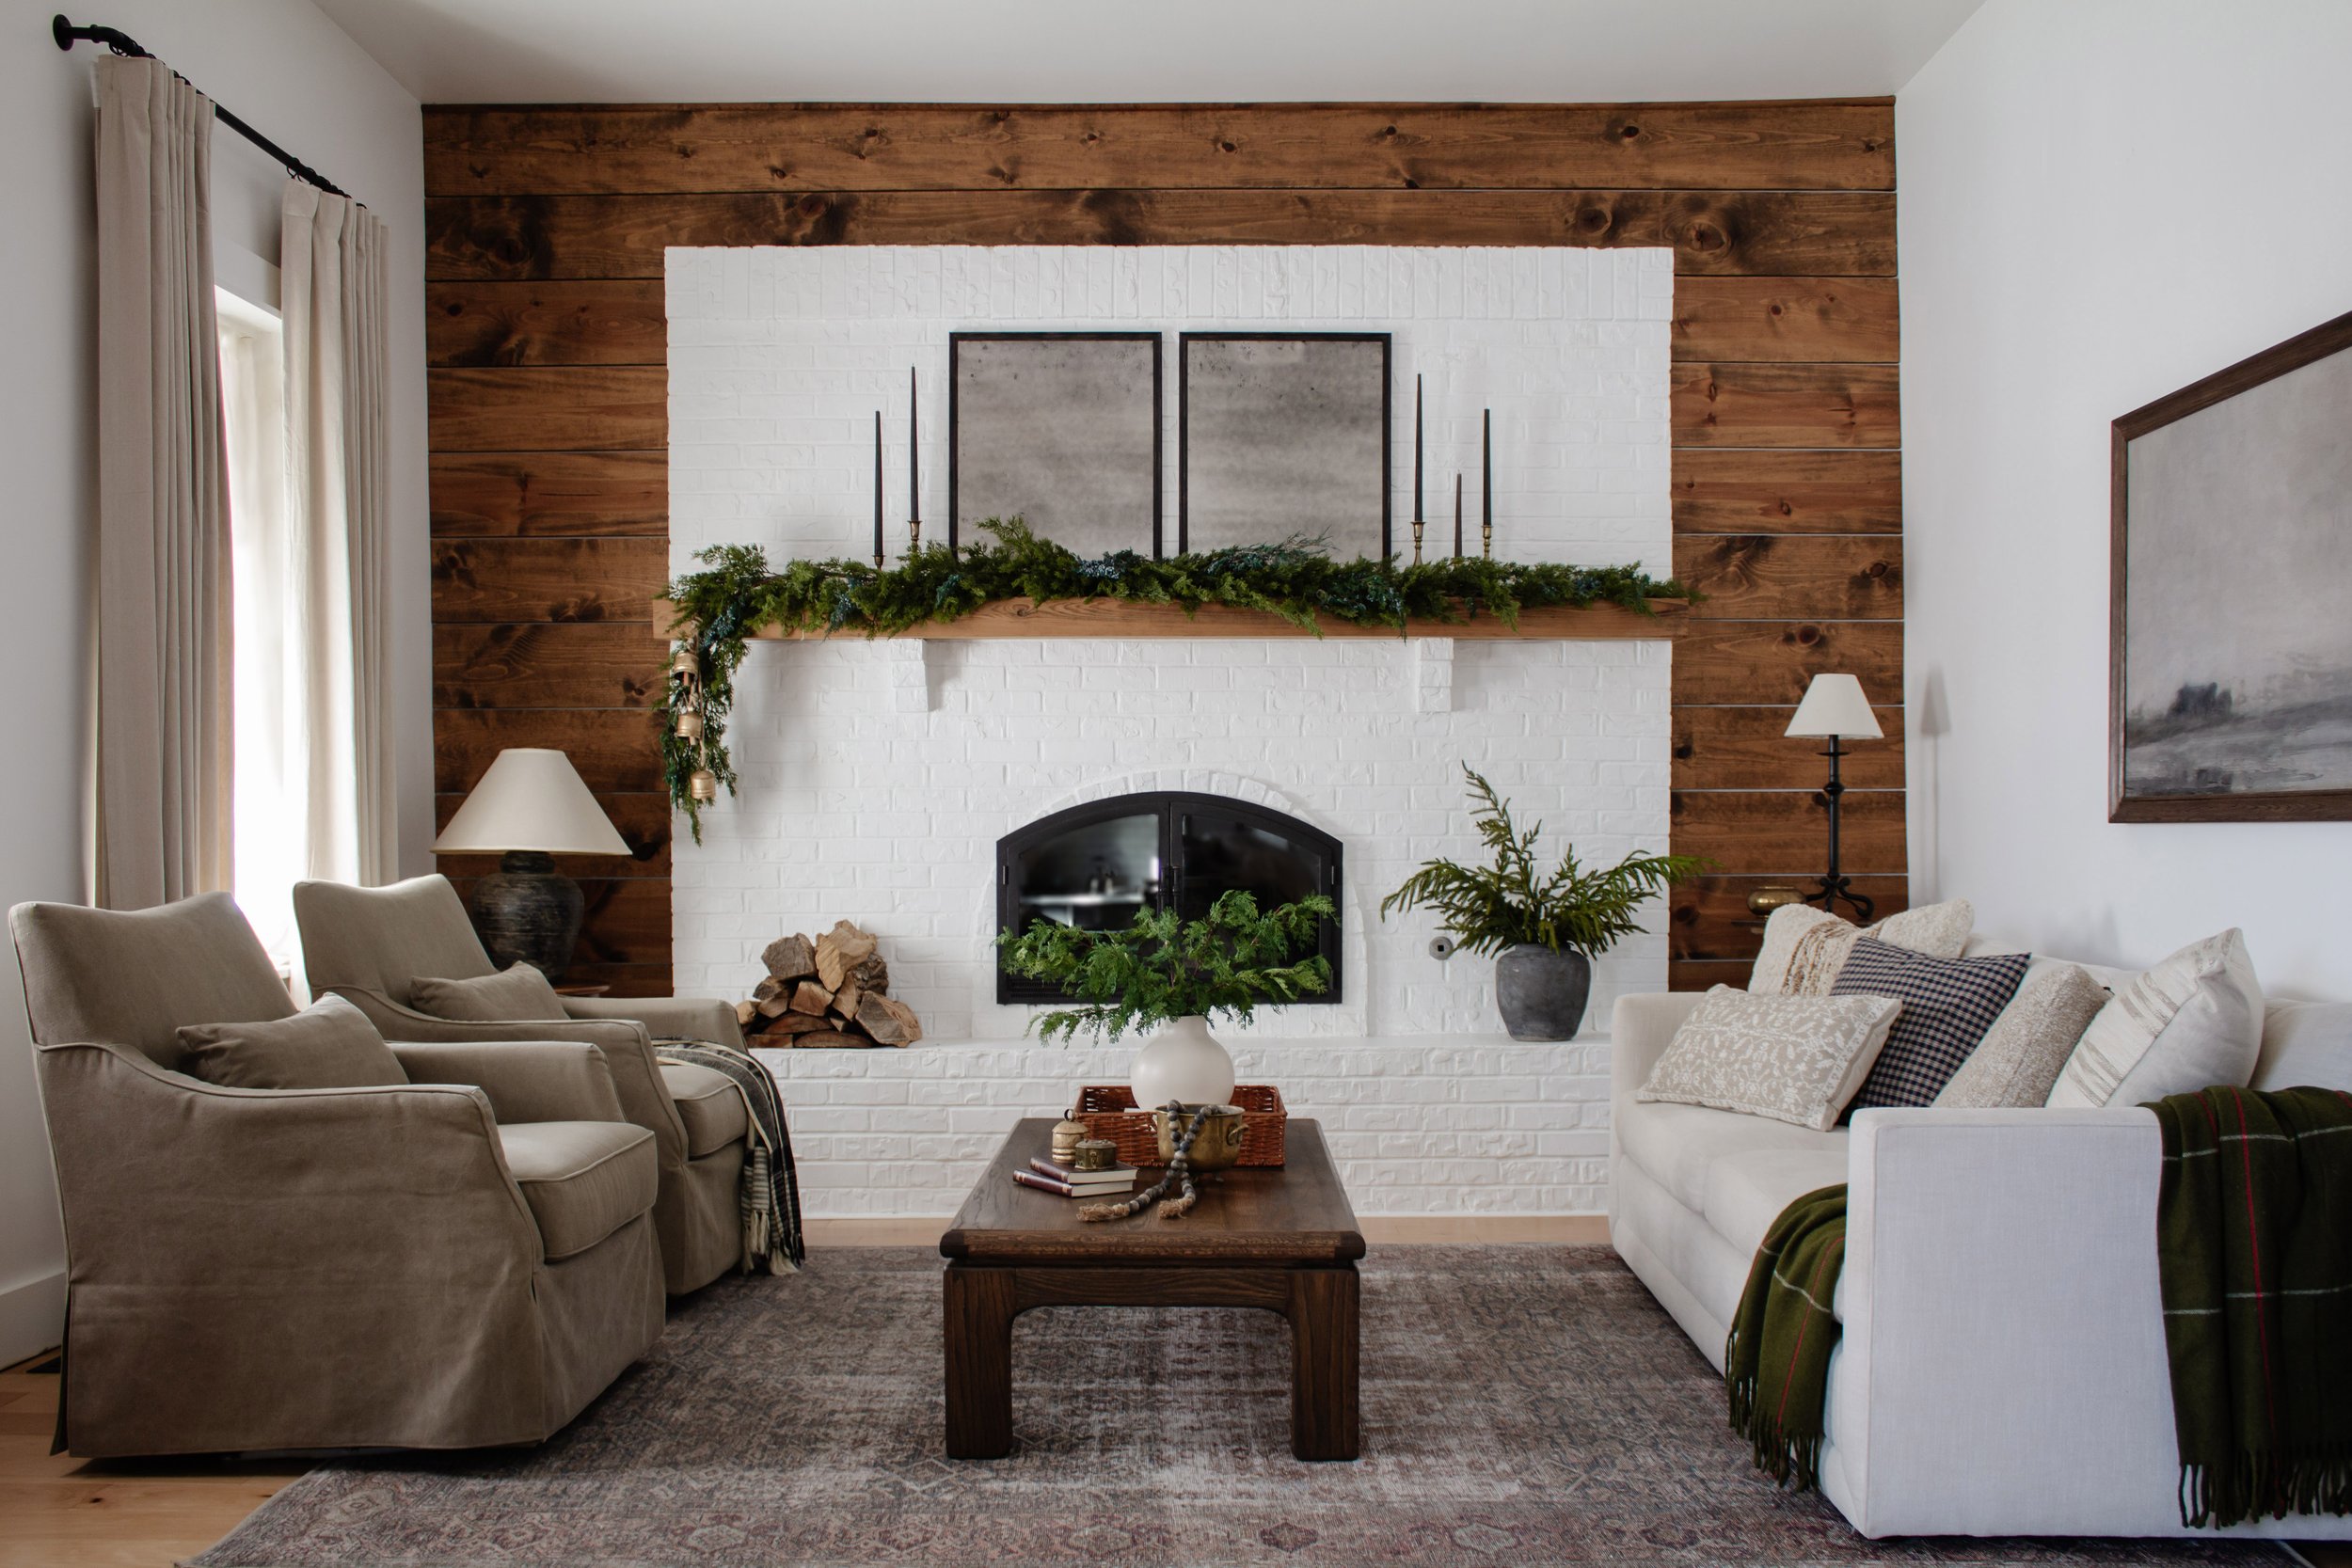 Cozy living room Christmas decorations. Holiday decor inspiration. Paint white brick fireplace. Mantel decor. Faux garland under $80. | Nadine Stay